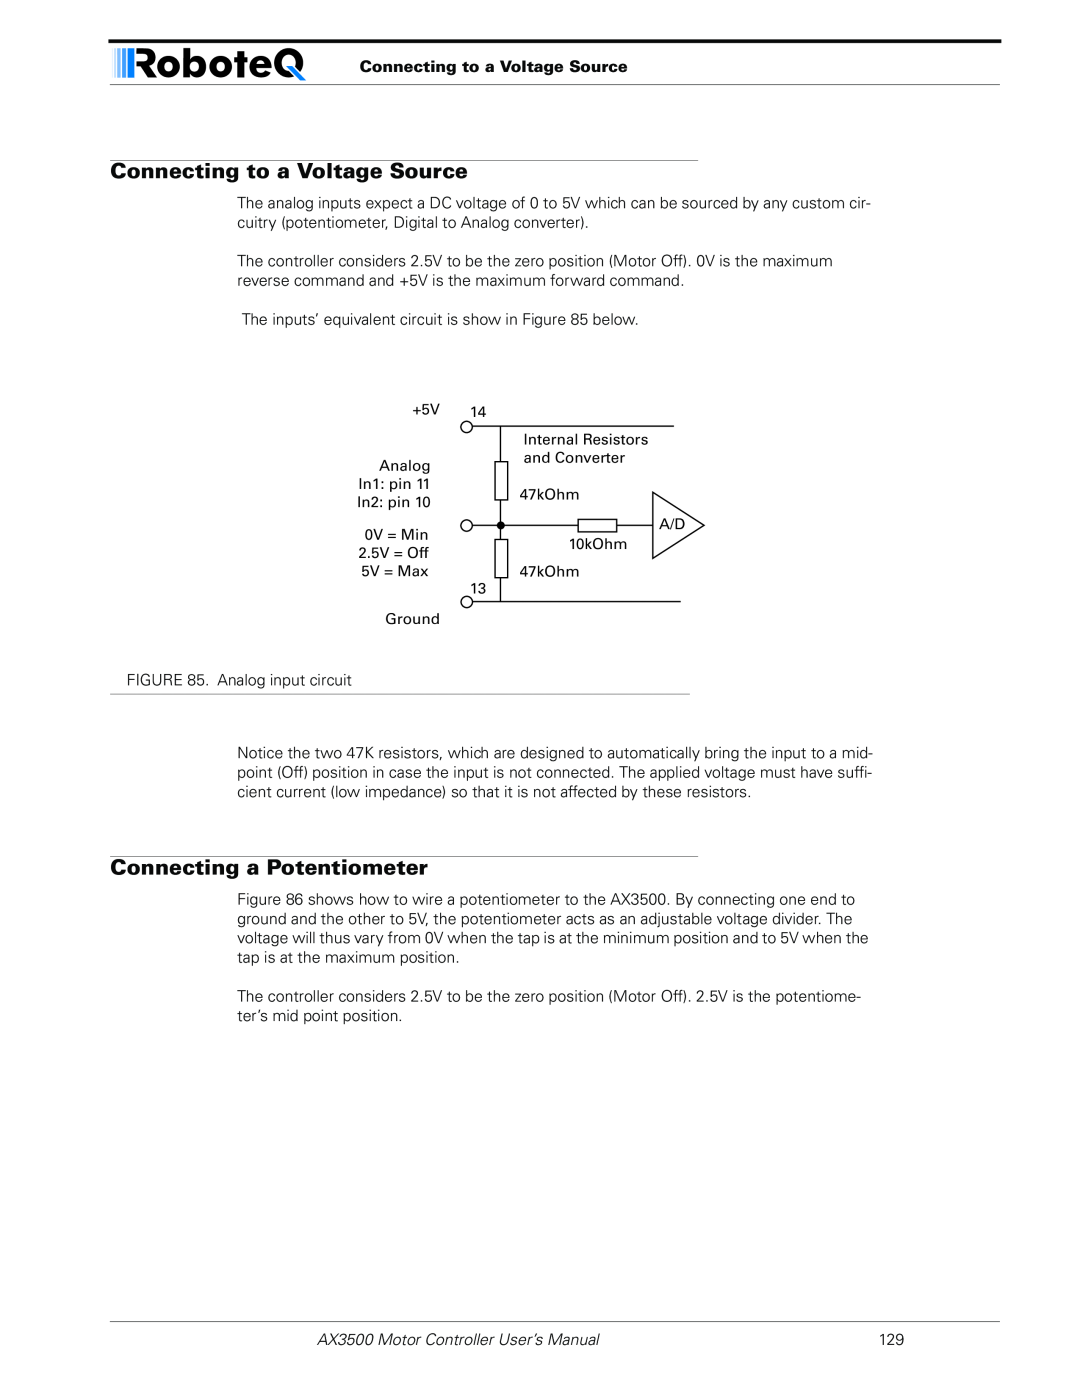 RoboteQ user manual Connecting to a Voltage Source, Connecting a Potentiometer, AX3500 Motor Controller User’s Manual 